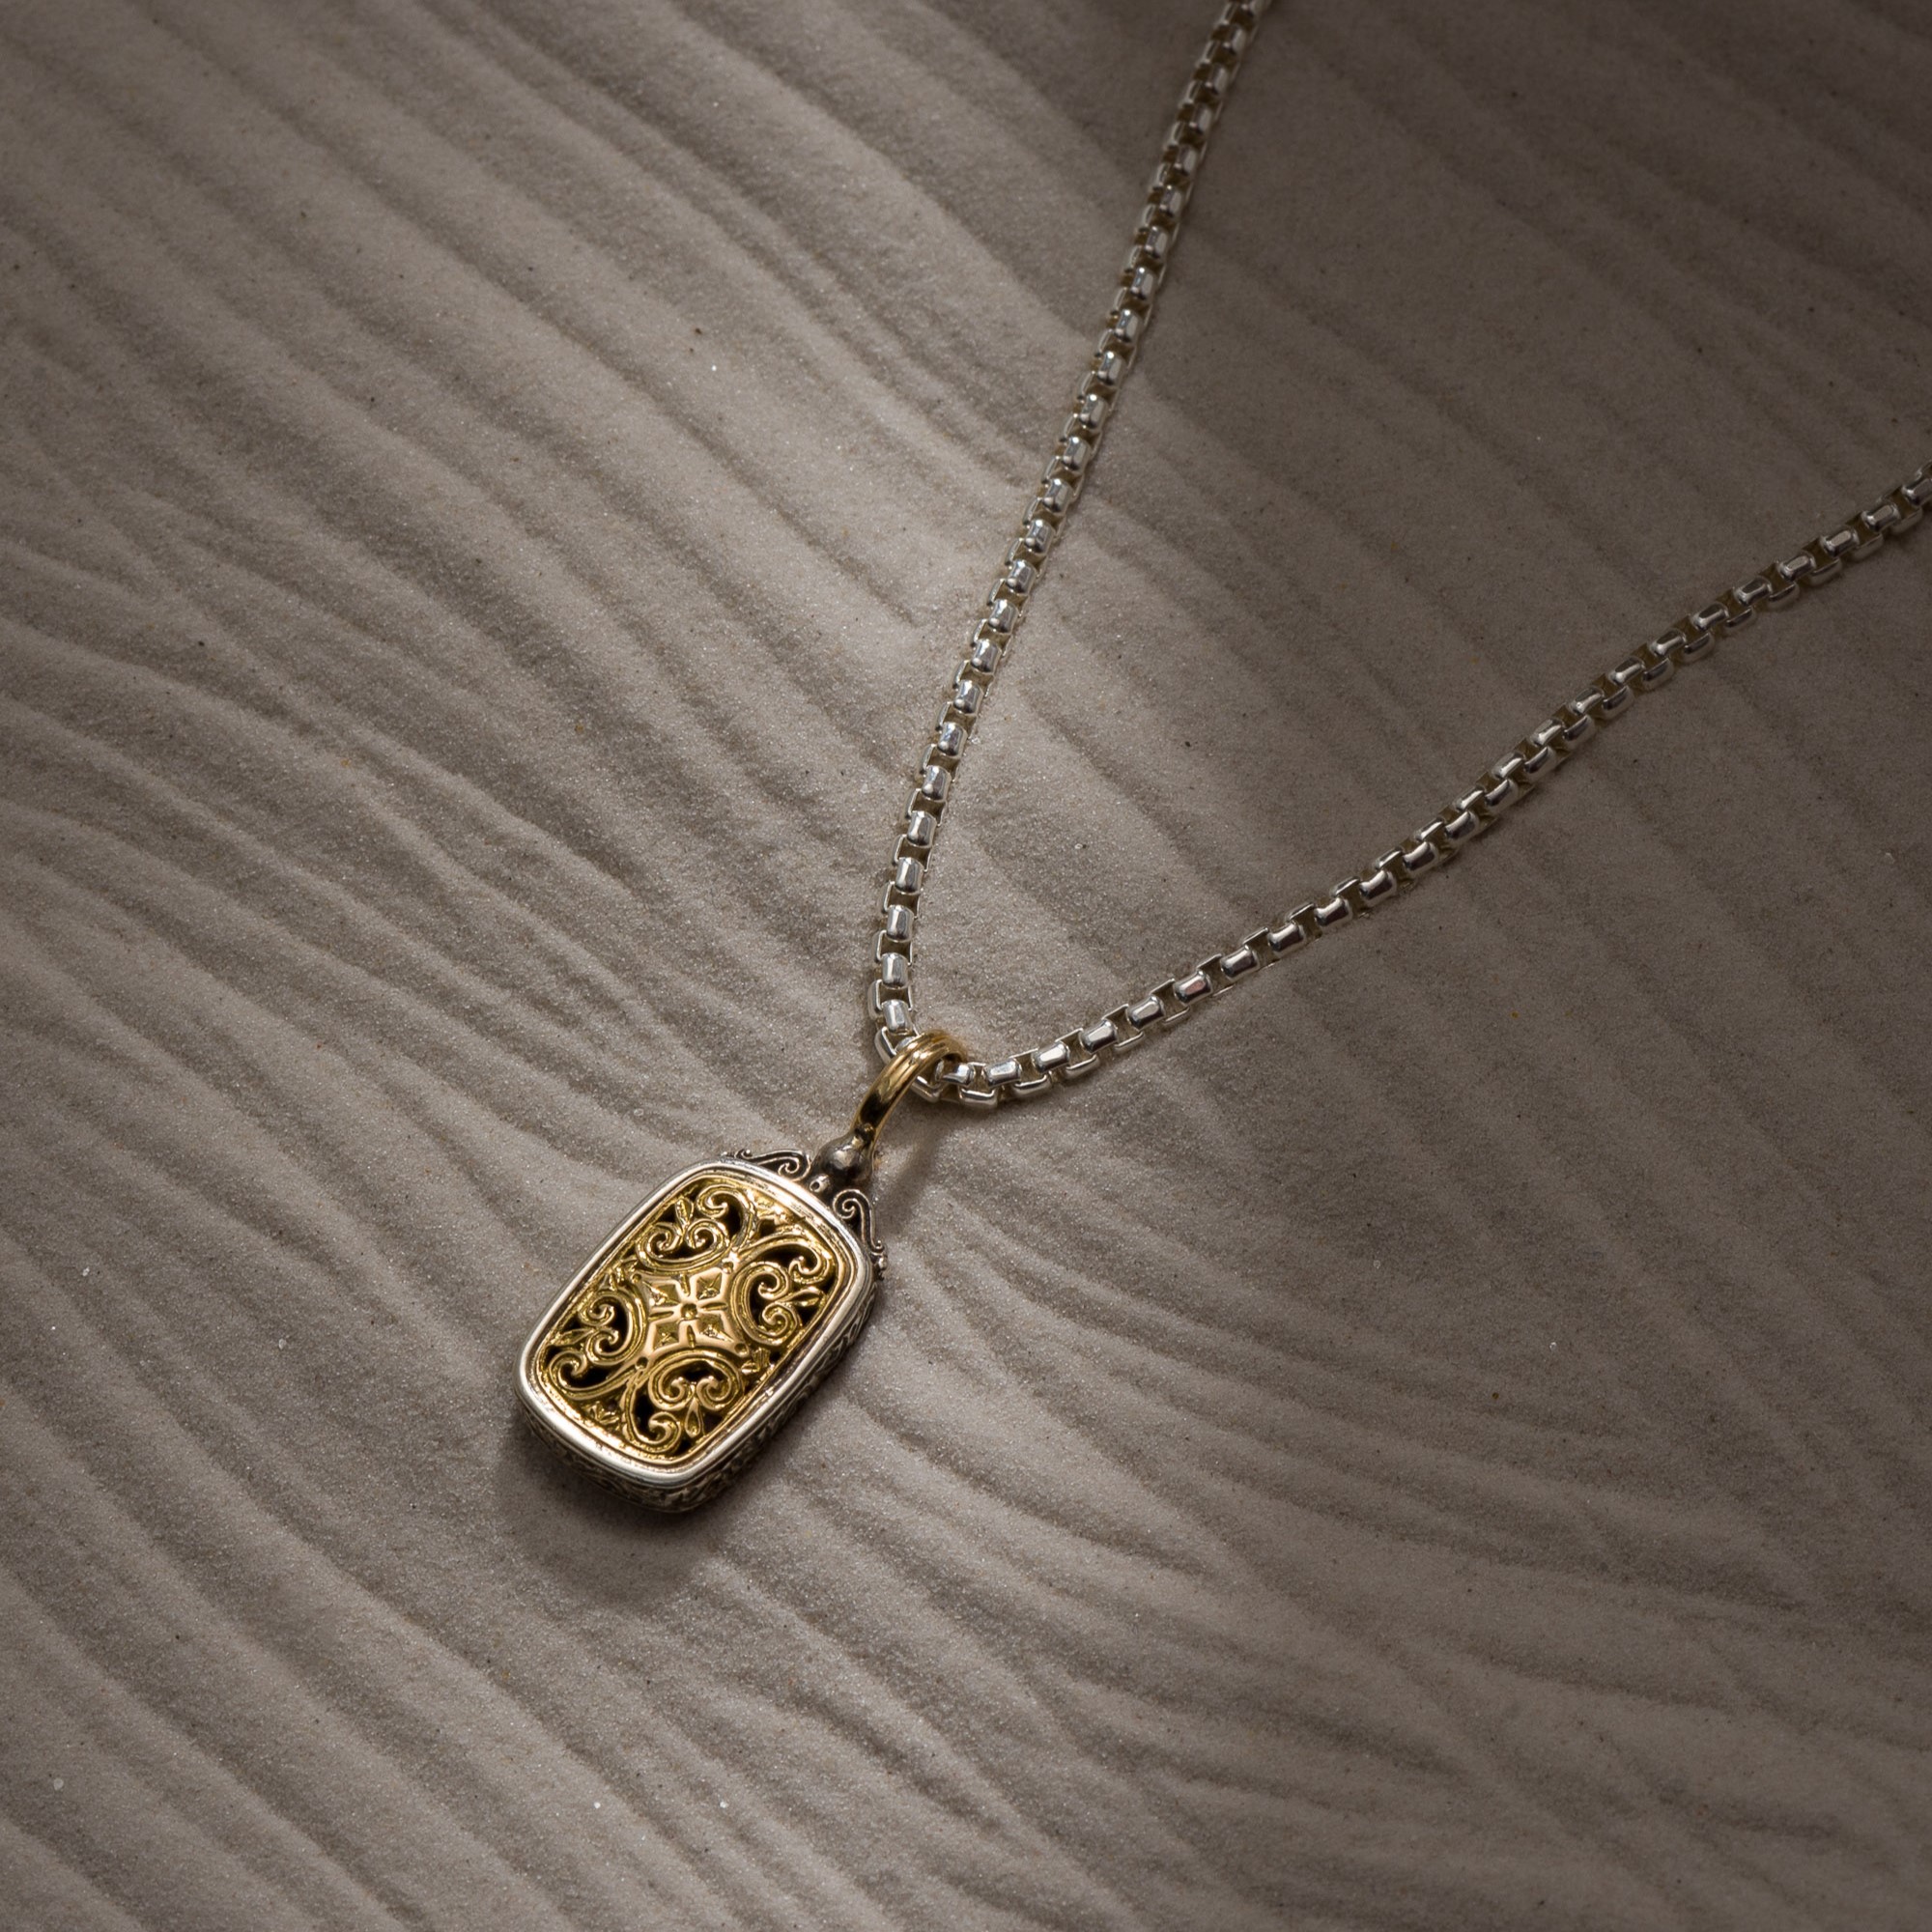 Mediterranean Cushion Pendant in 18K Gold and Sterling Silver